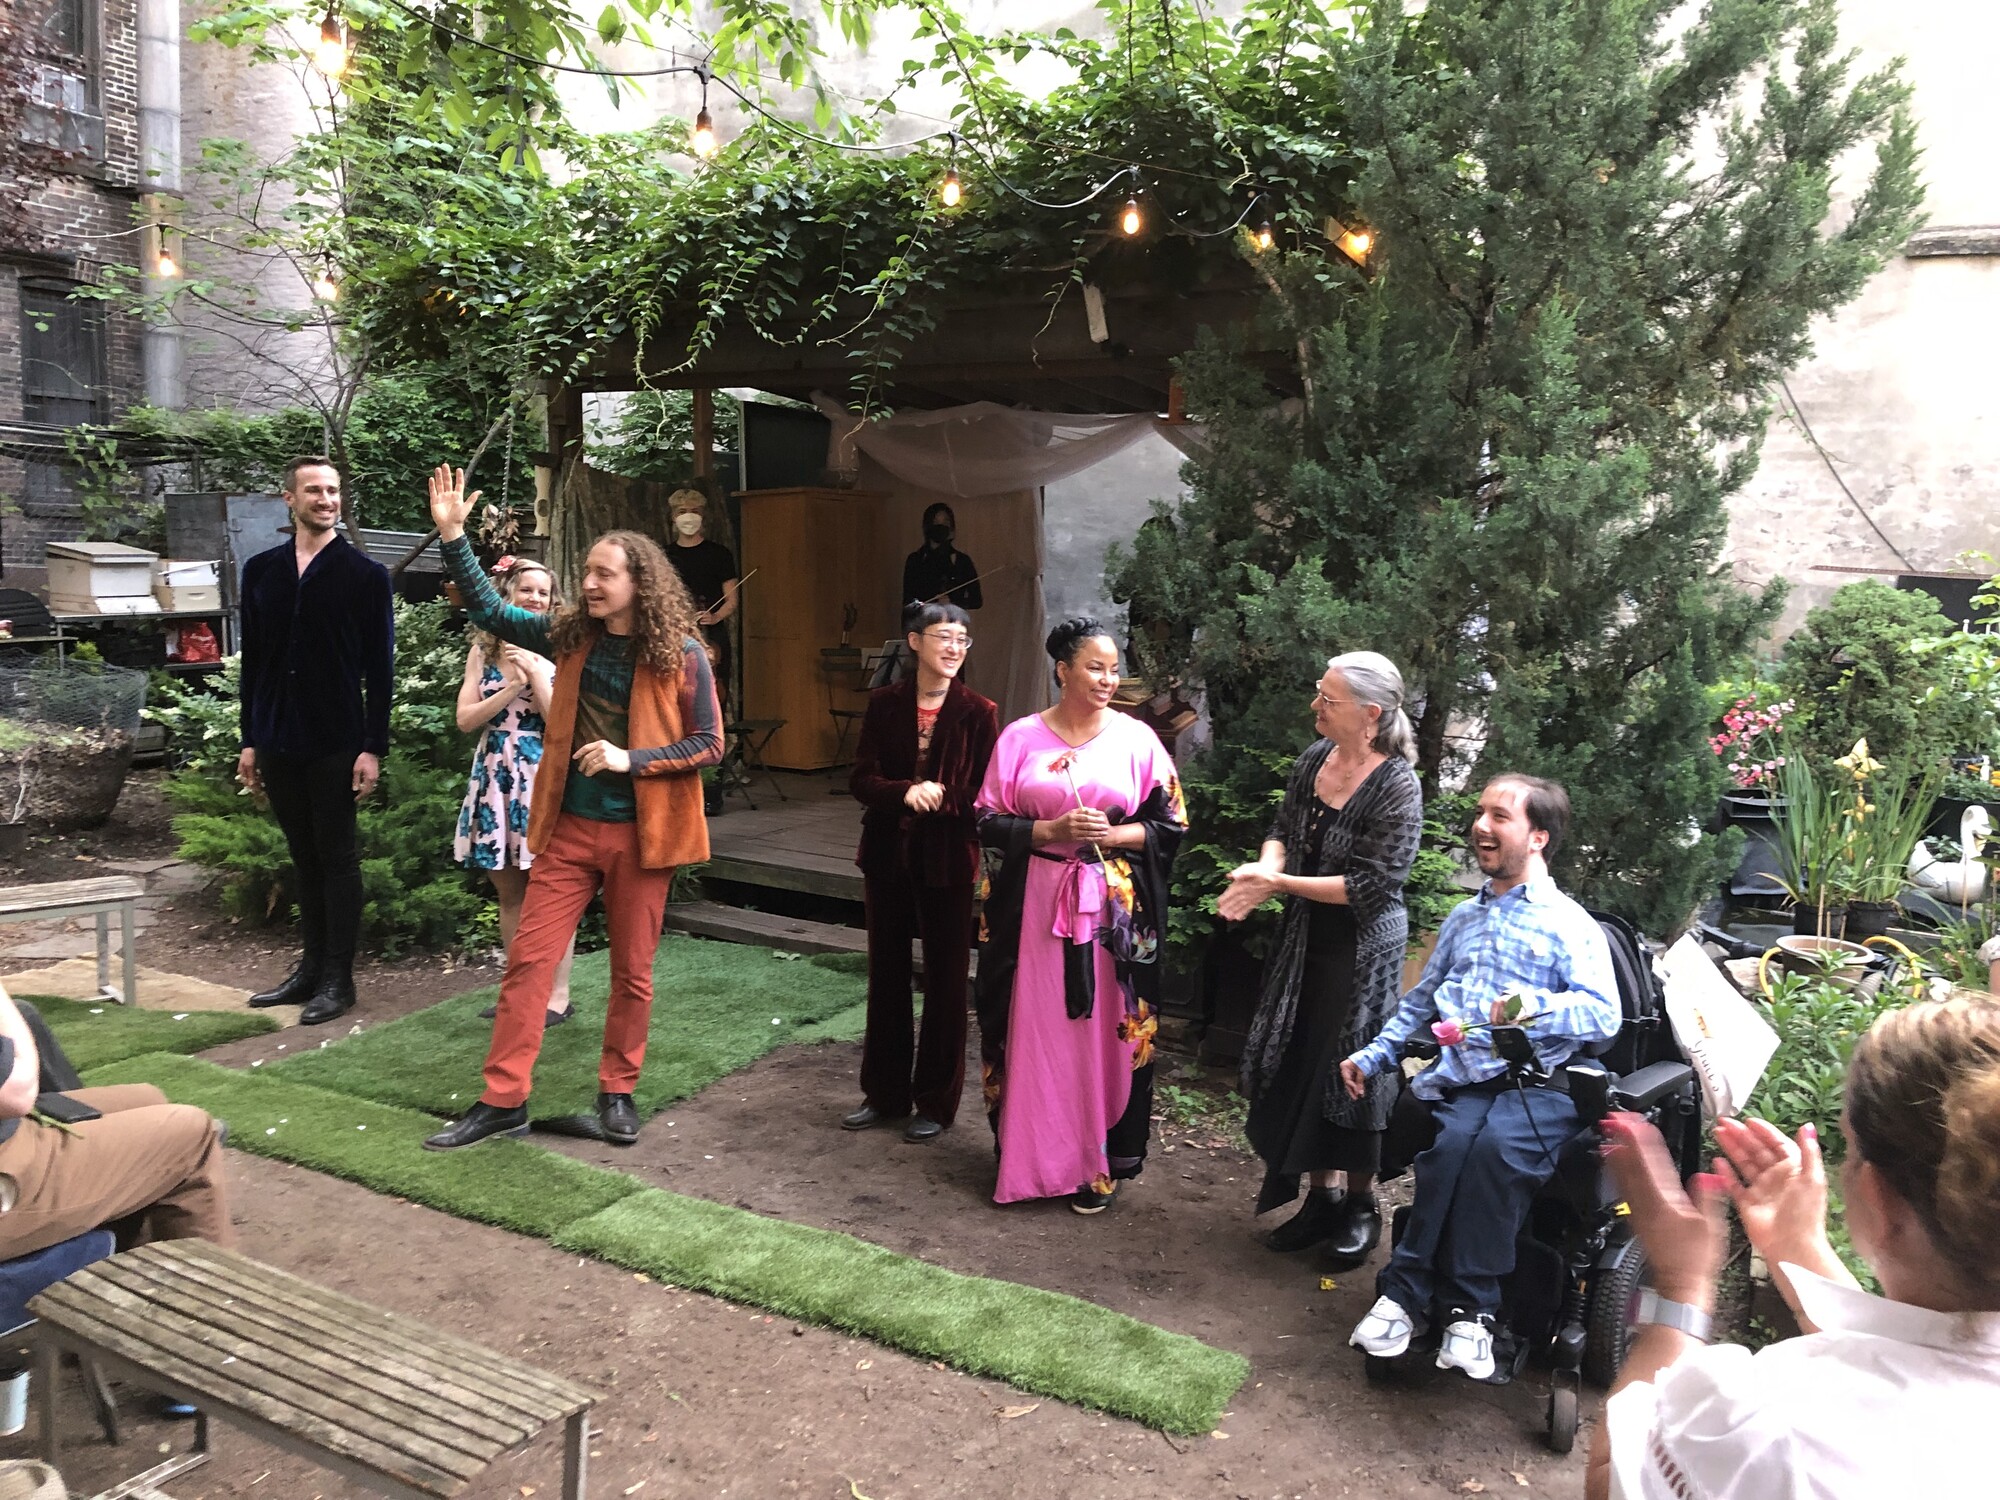 A wide shot of a verdant outdoor stage at Campos Community Garden as the setting for a baroque opera - the performers are taking their bows at the end surrounded by flowers and lush bushes that frame a wooden stage, upon which stands a baroque string orchestra.